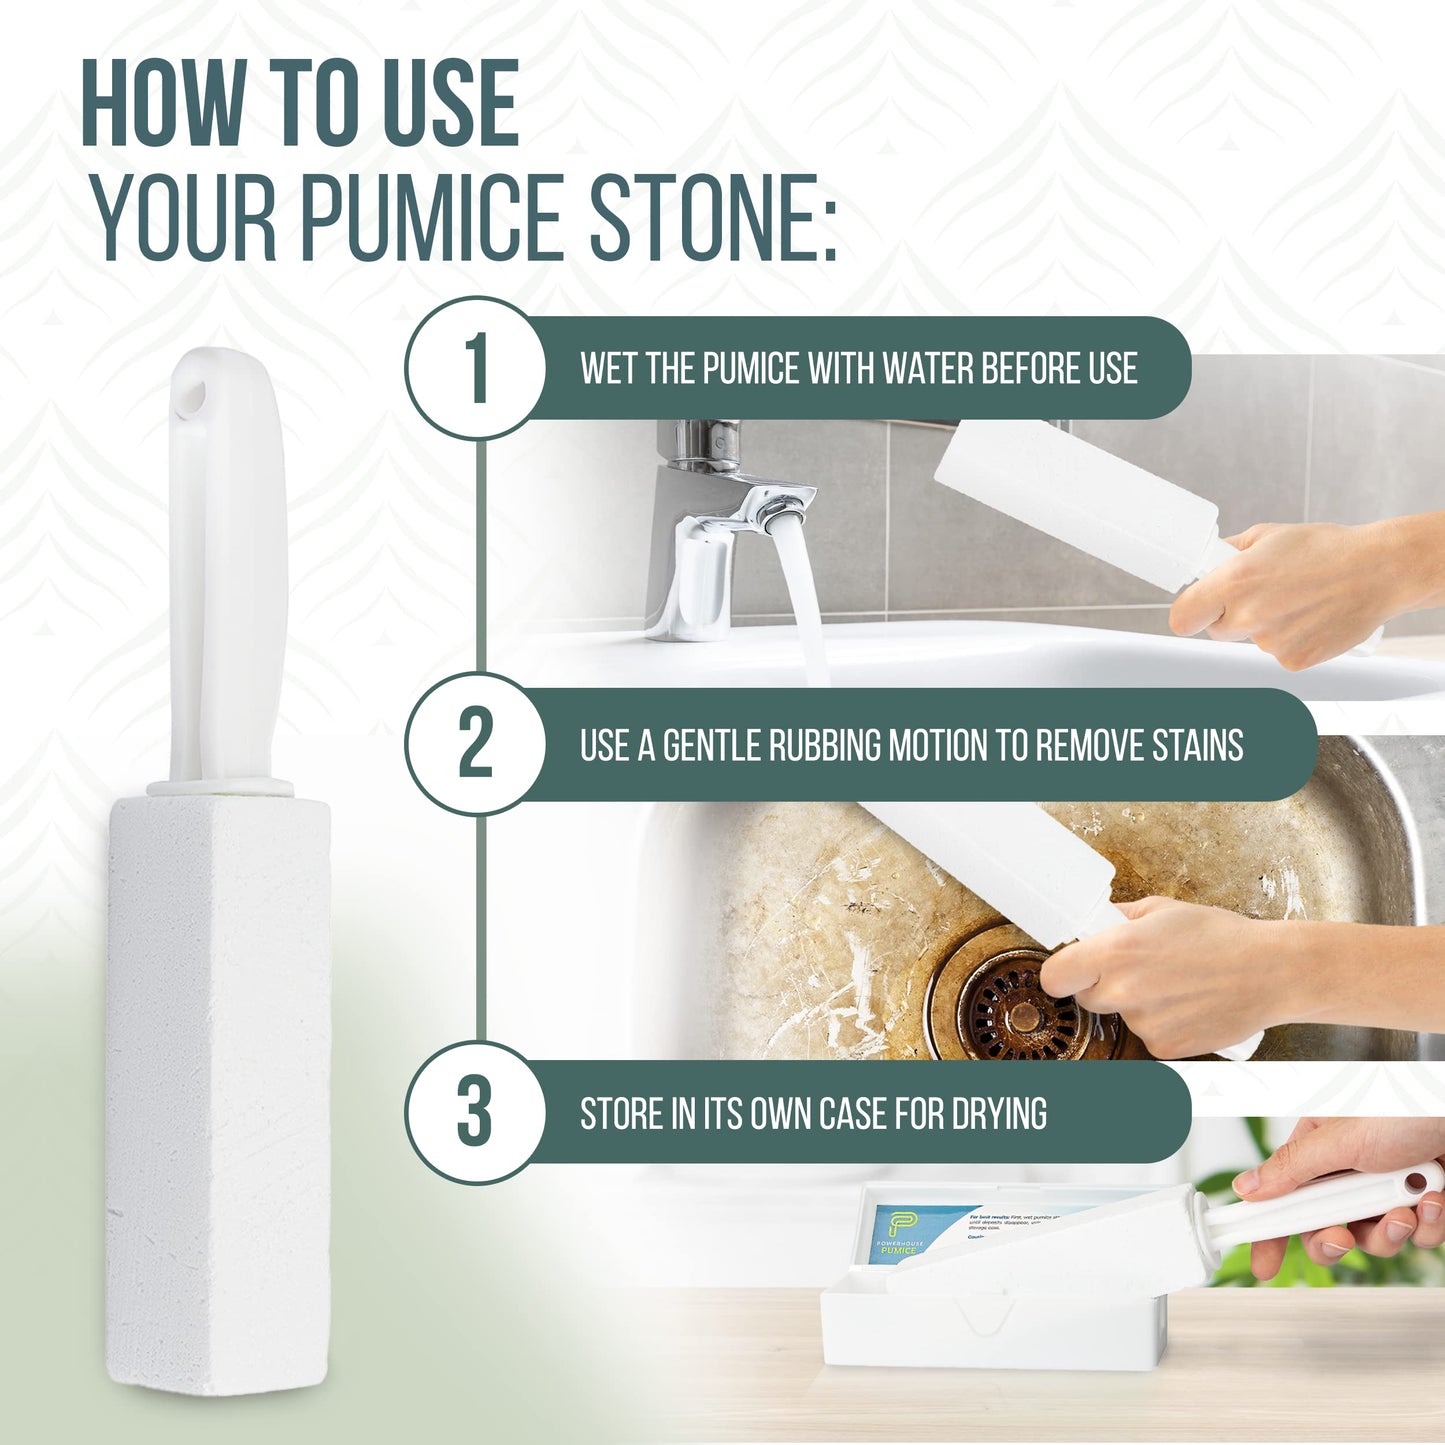 Powerstone Pumice Stone Toilet Bowl Cleaner with Handle (1-pack) - A Solution for Hard Water Stains on Toilets, Grills, Tiles, Grout & Pools